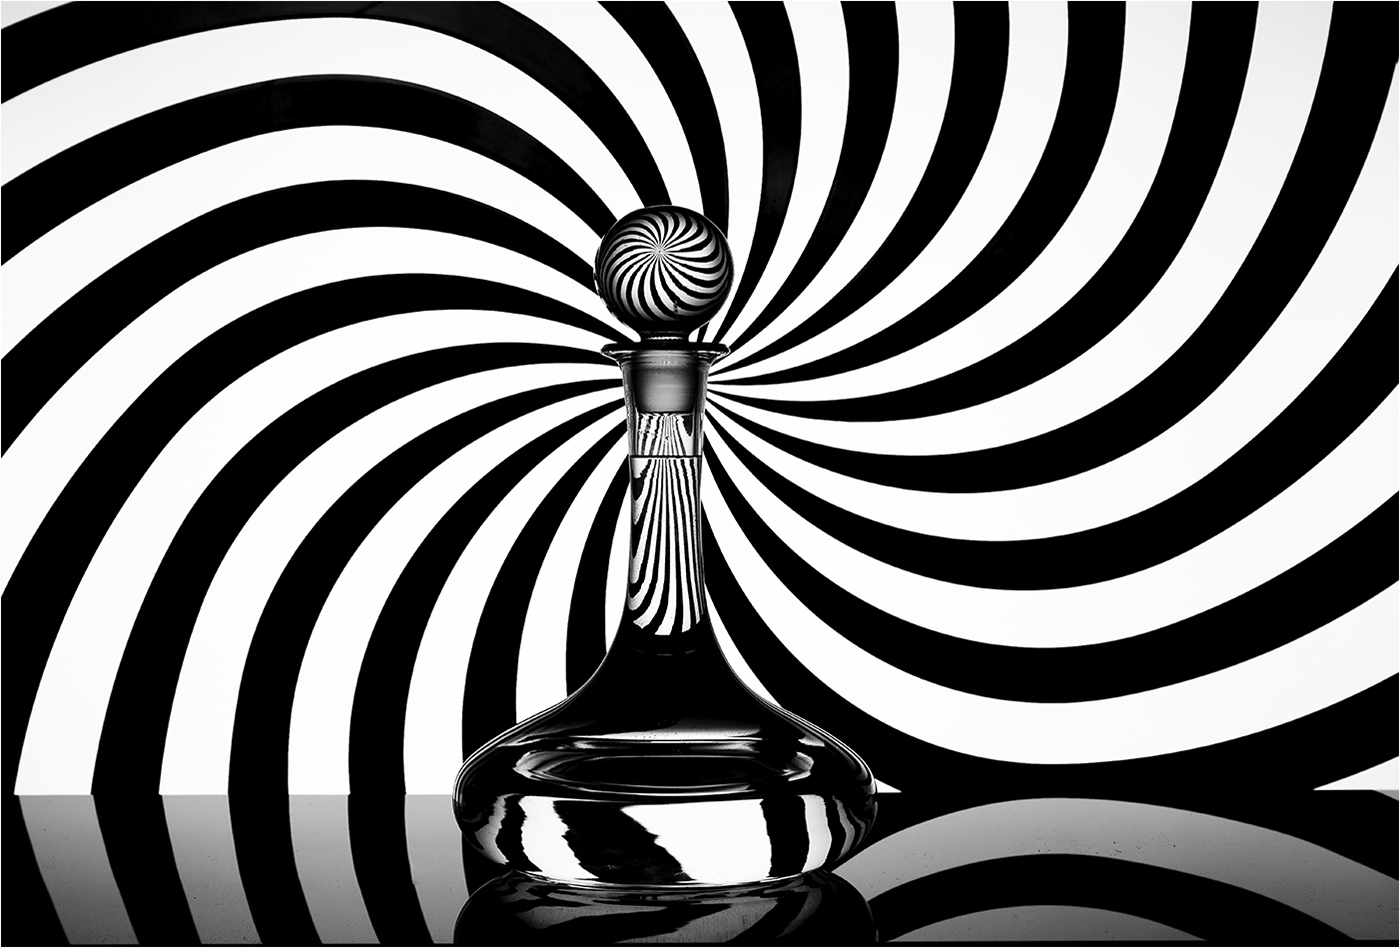 Twist in Black and White - by My Phuong Nguyen